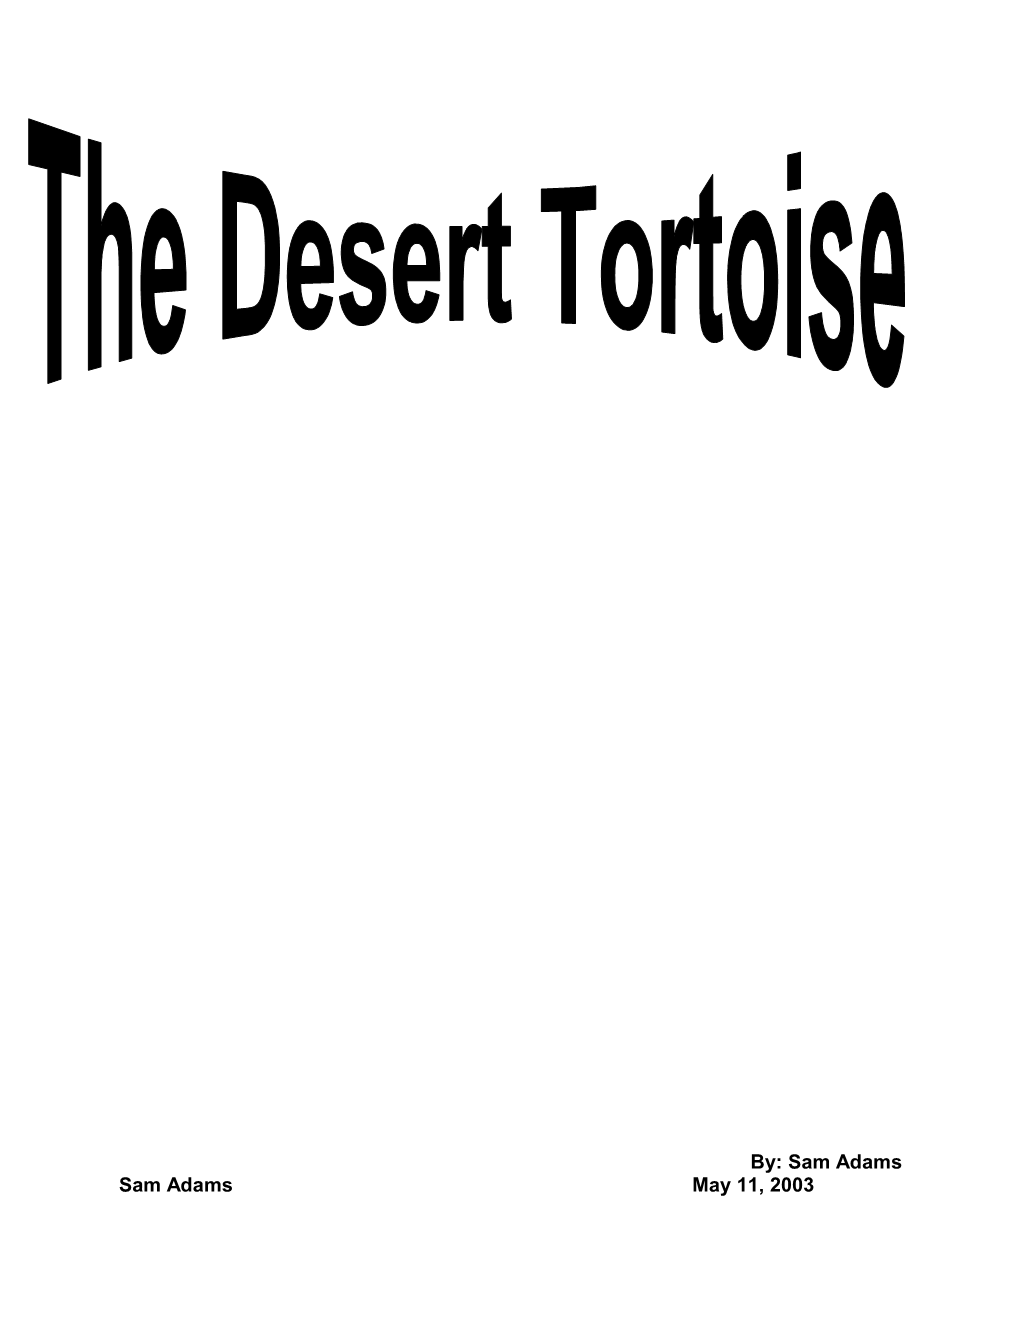 Tortoises Are Known As Massive Giants but the Desert Tortoise Only Grows to Be 15 Inches